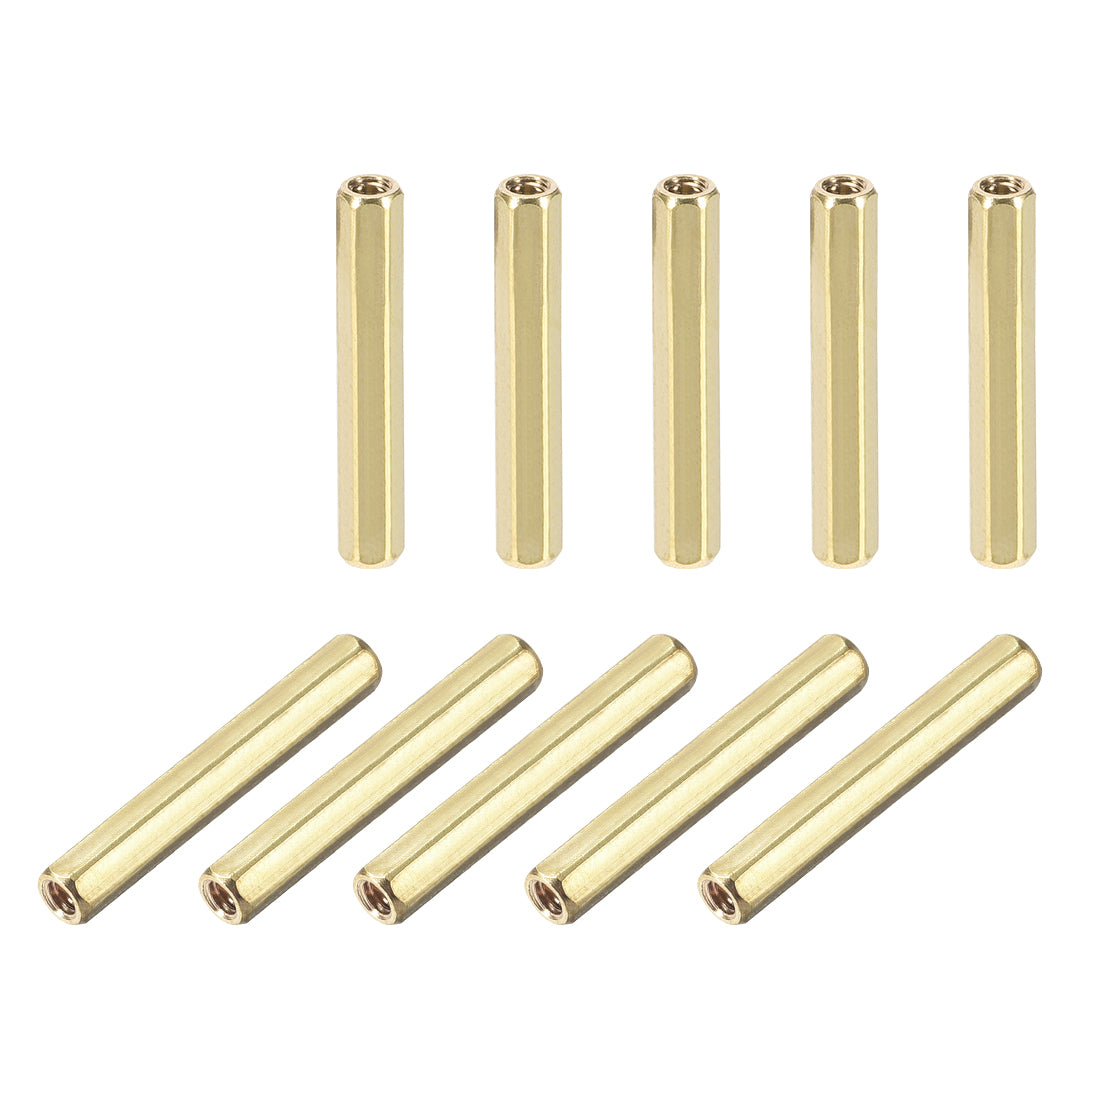 Uxcell Uxcell M5 x 20 mm Female to Female Hex Brass Spacer Standoff 30pcs